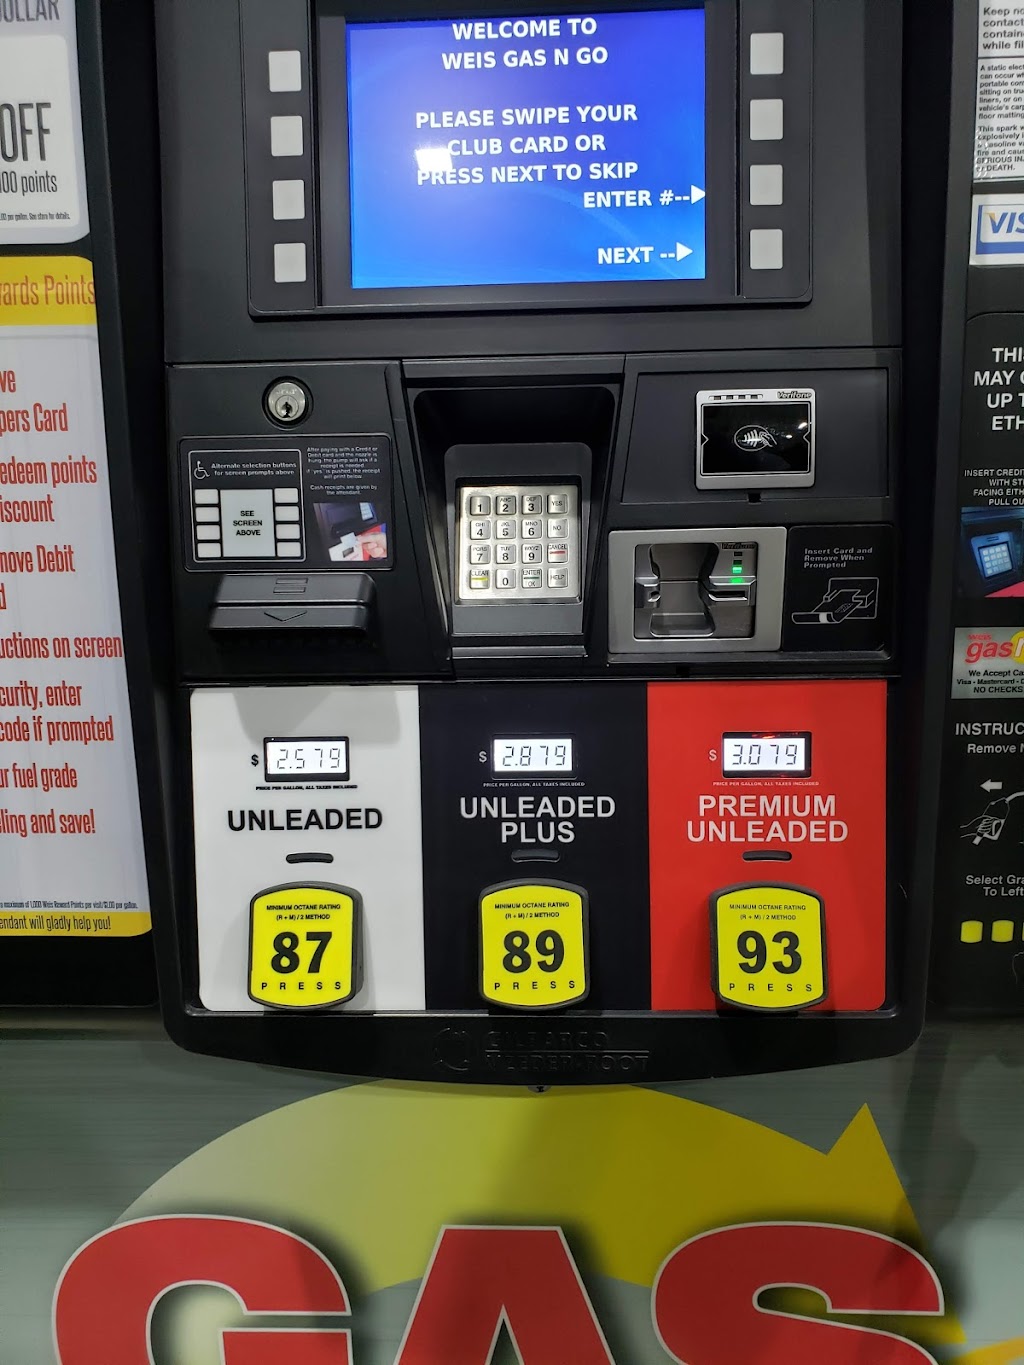 Weis gas n go | 2100 E County Line Rd, Huntingdon Valley, PA 19006 | Phone: (215) 357-1502